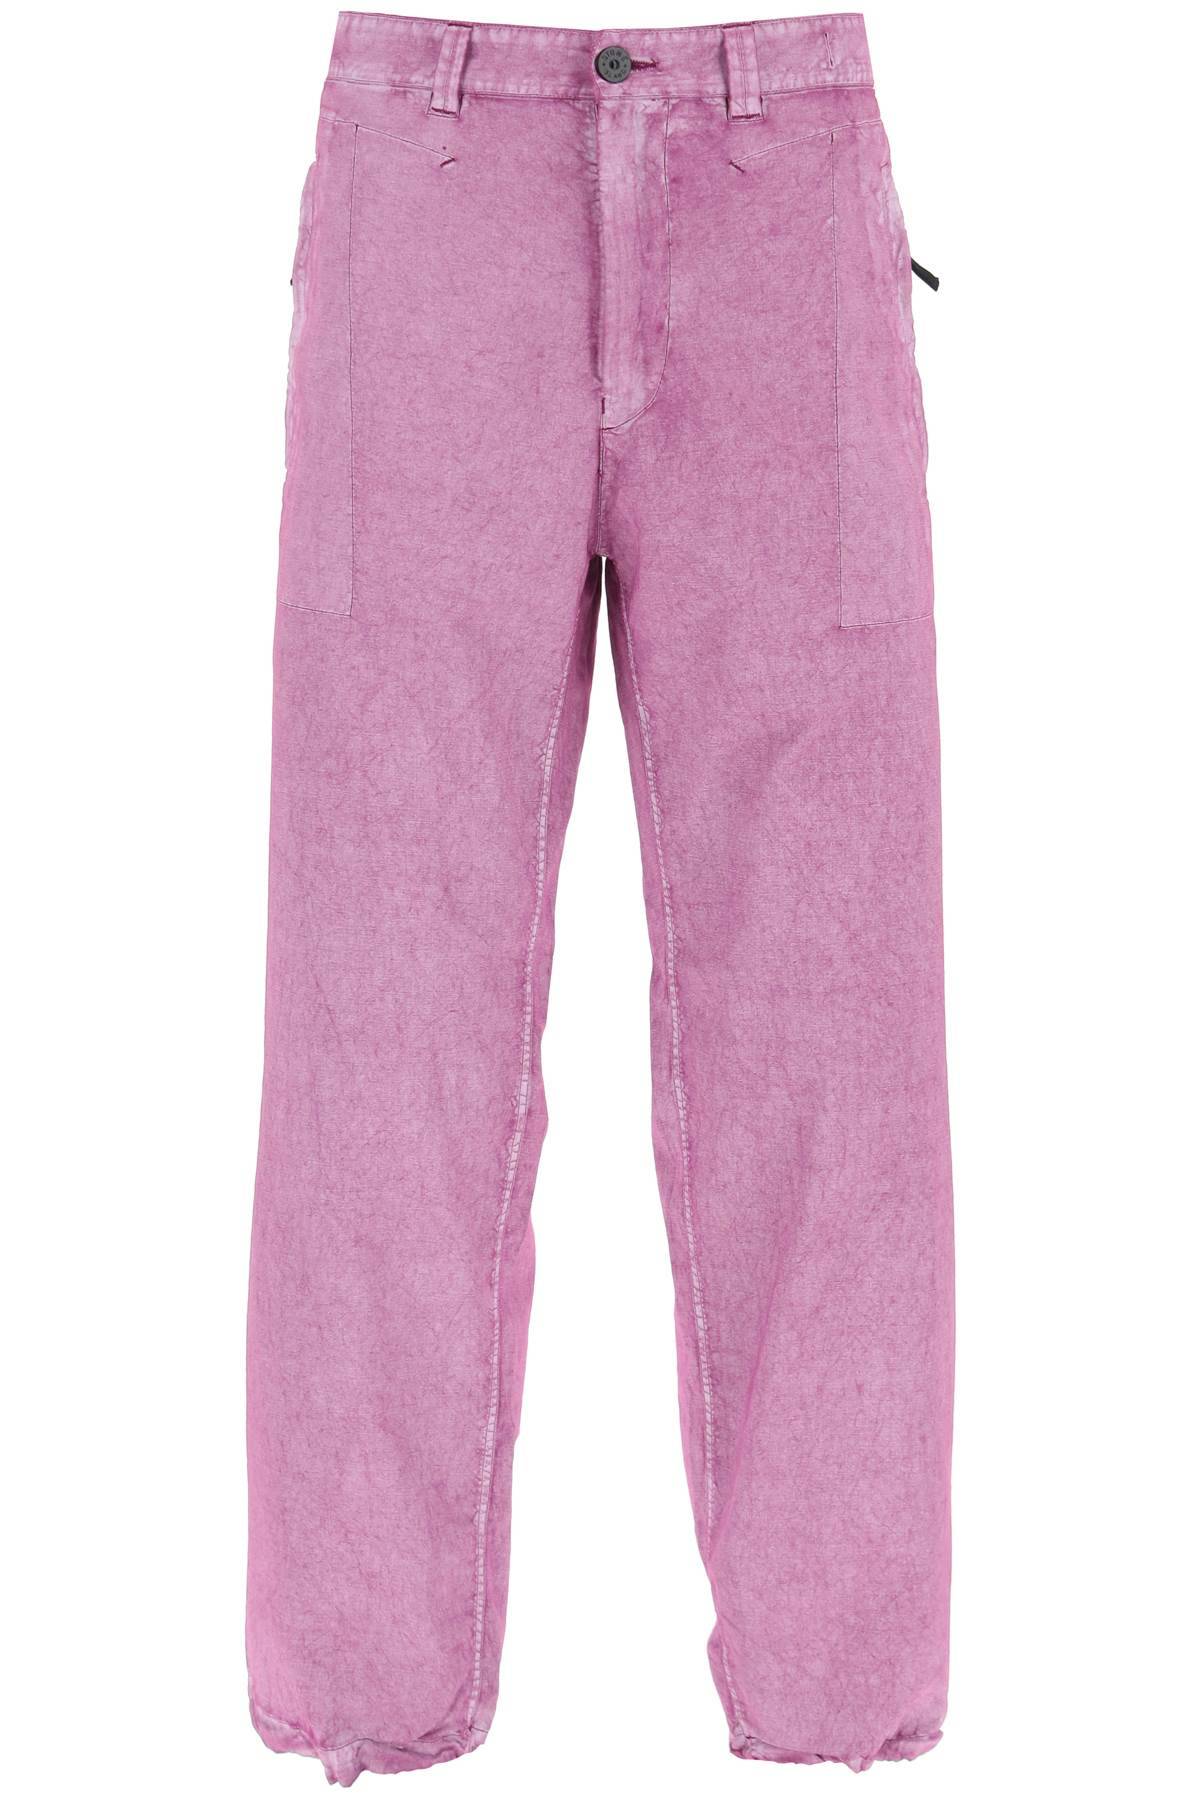 Stone Island Garment-dyed Cotton Utility Pants With Wide Leg In Purple